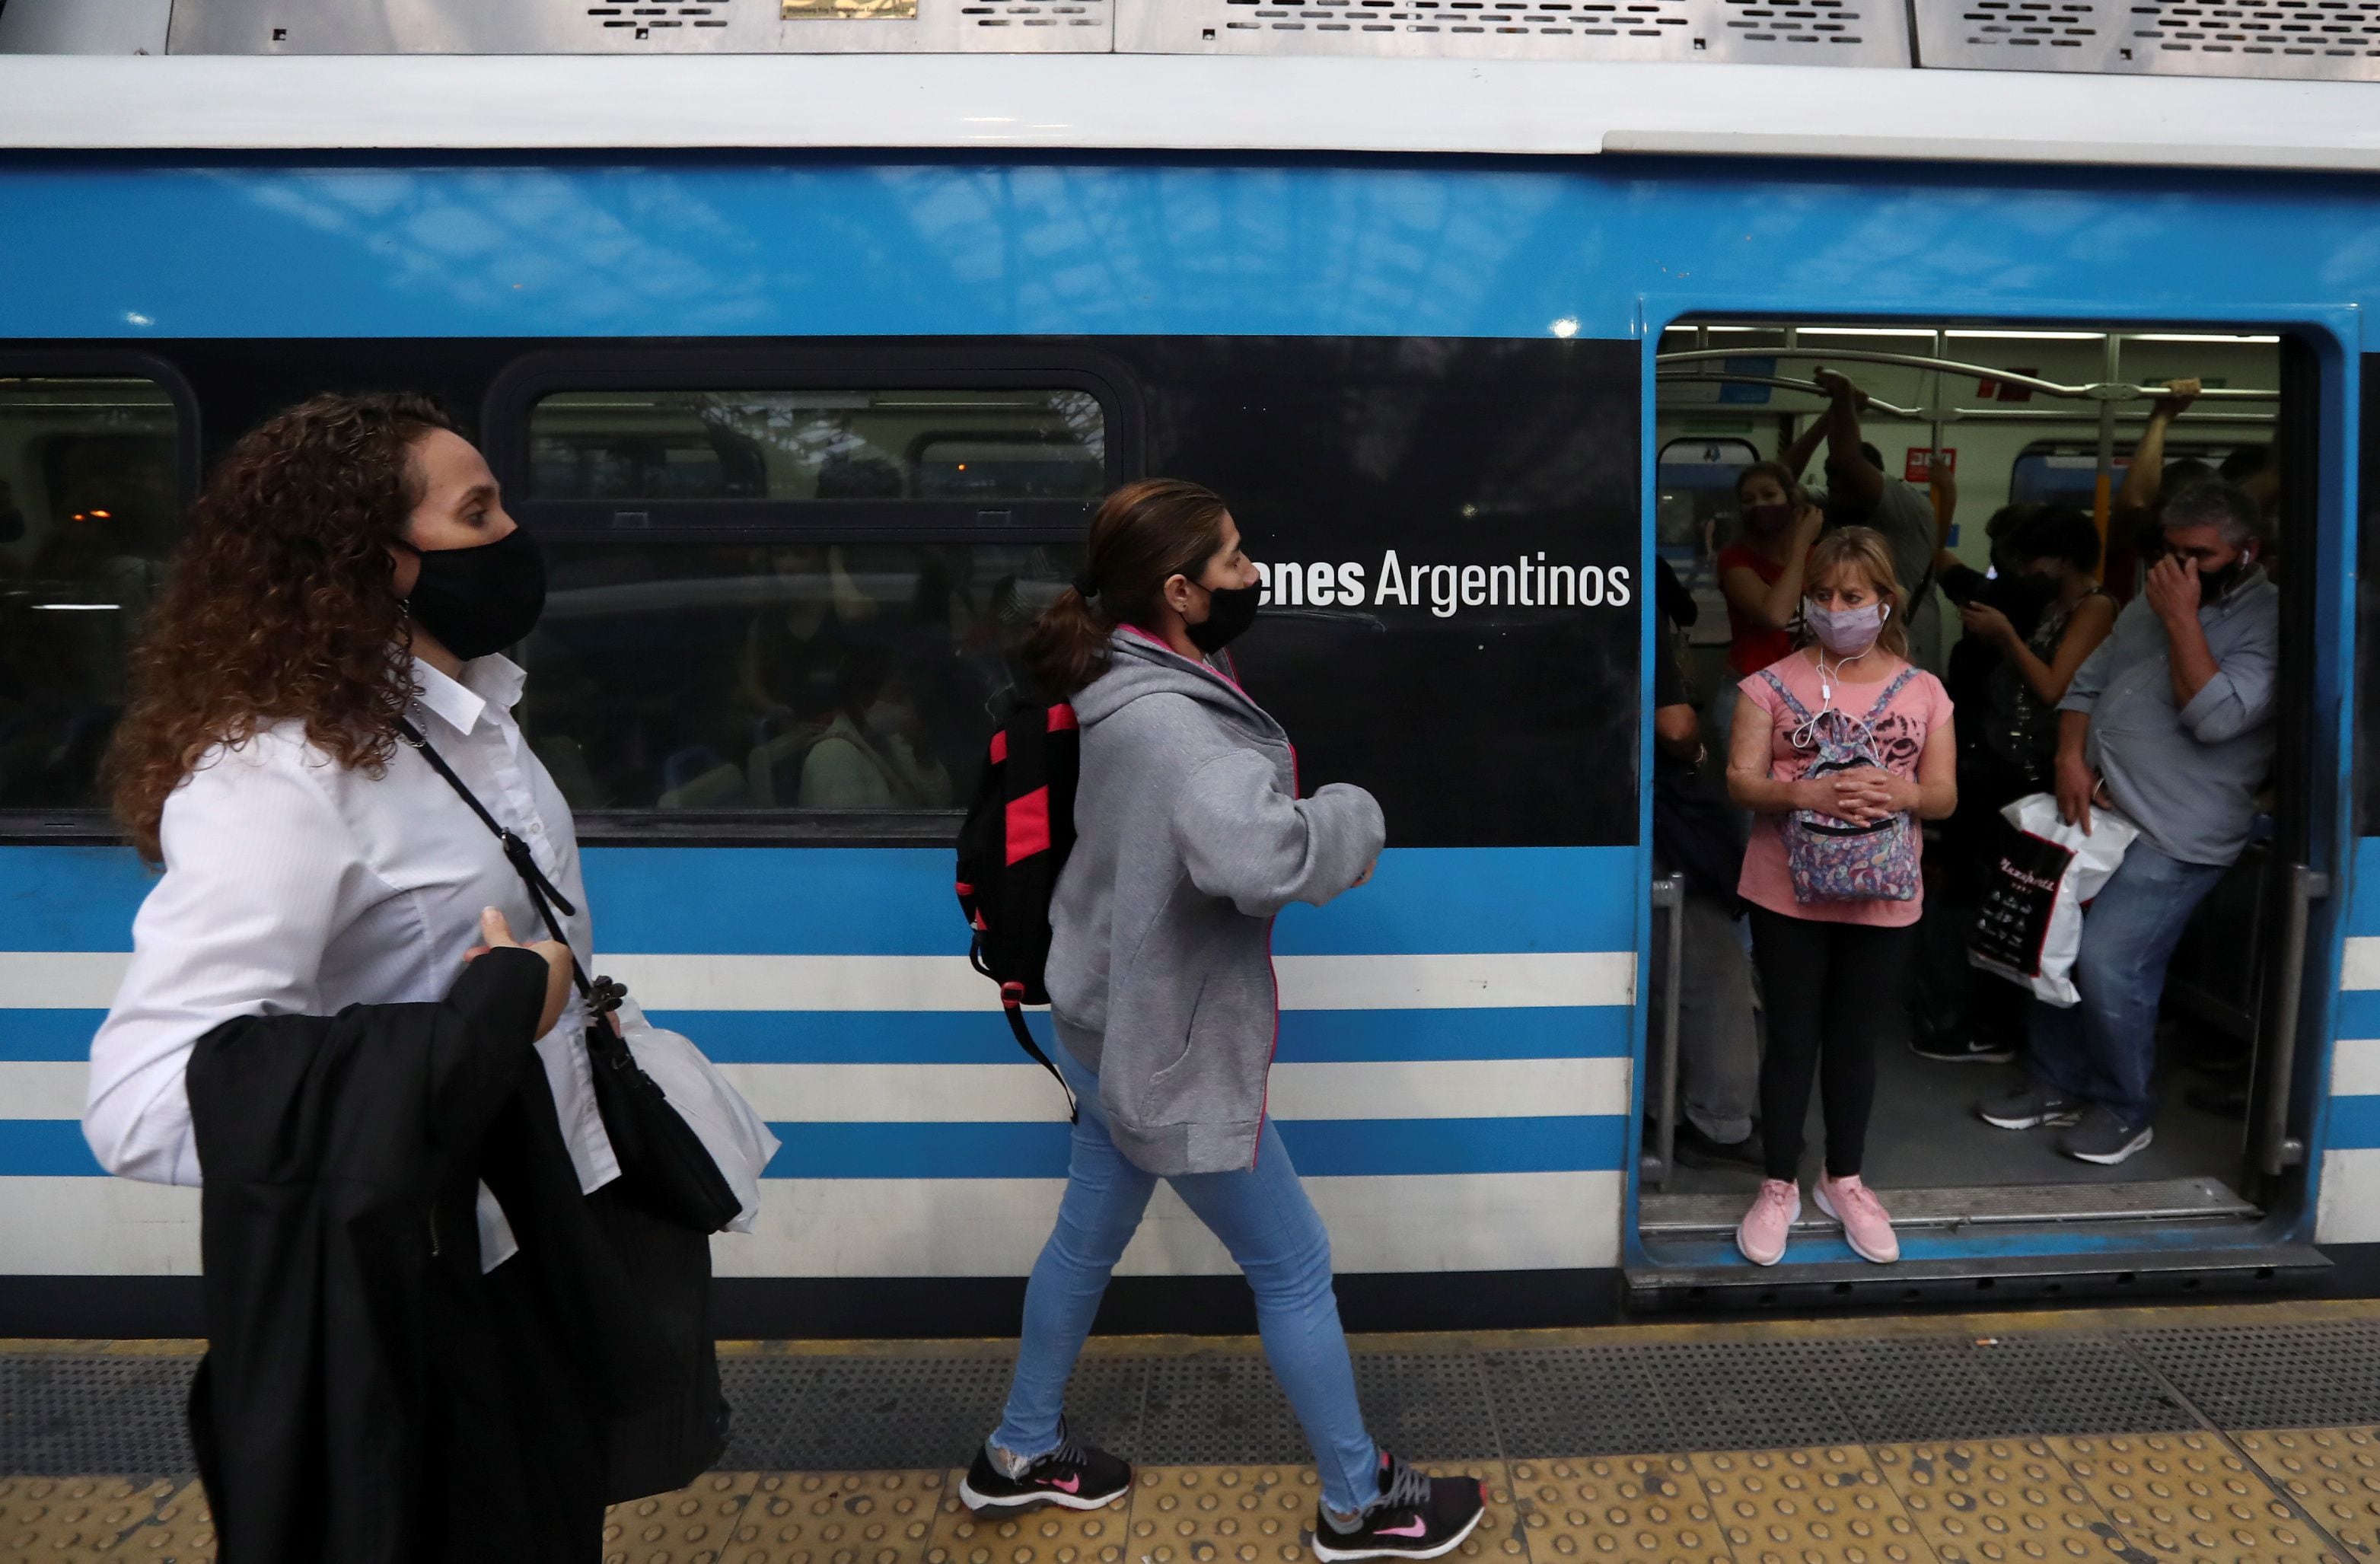 Passengers wearing face masks are seen inside a train at Constitucion train station, amid a rise in cases of the coronavirus disease (COVID-19), in Buenos Aires, Argentina April 8, 2021. REUTERS/Agustin Marcarian